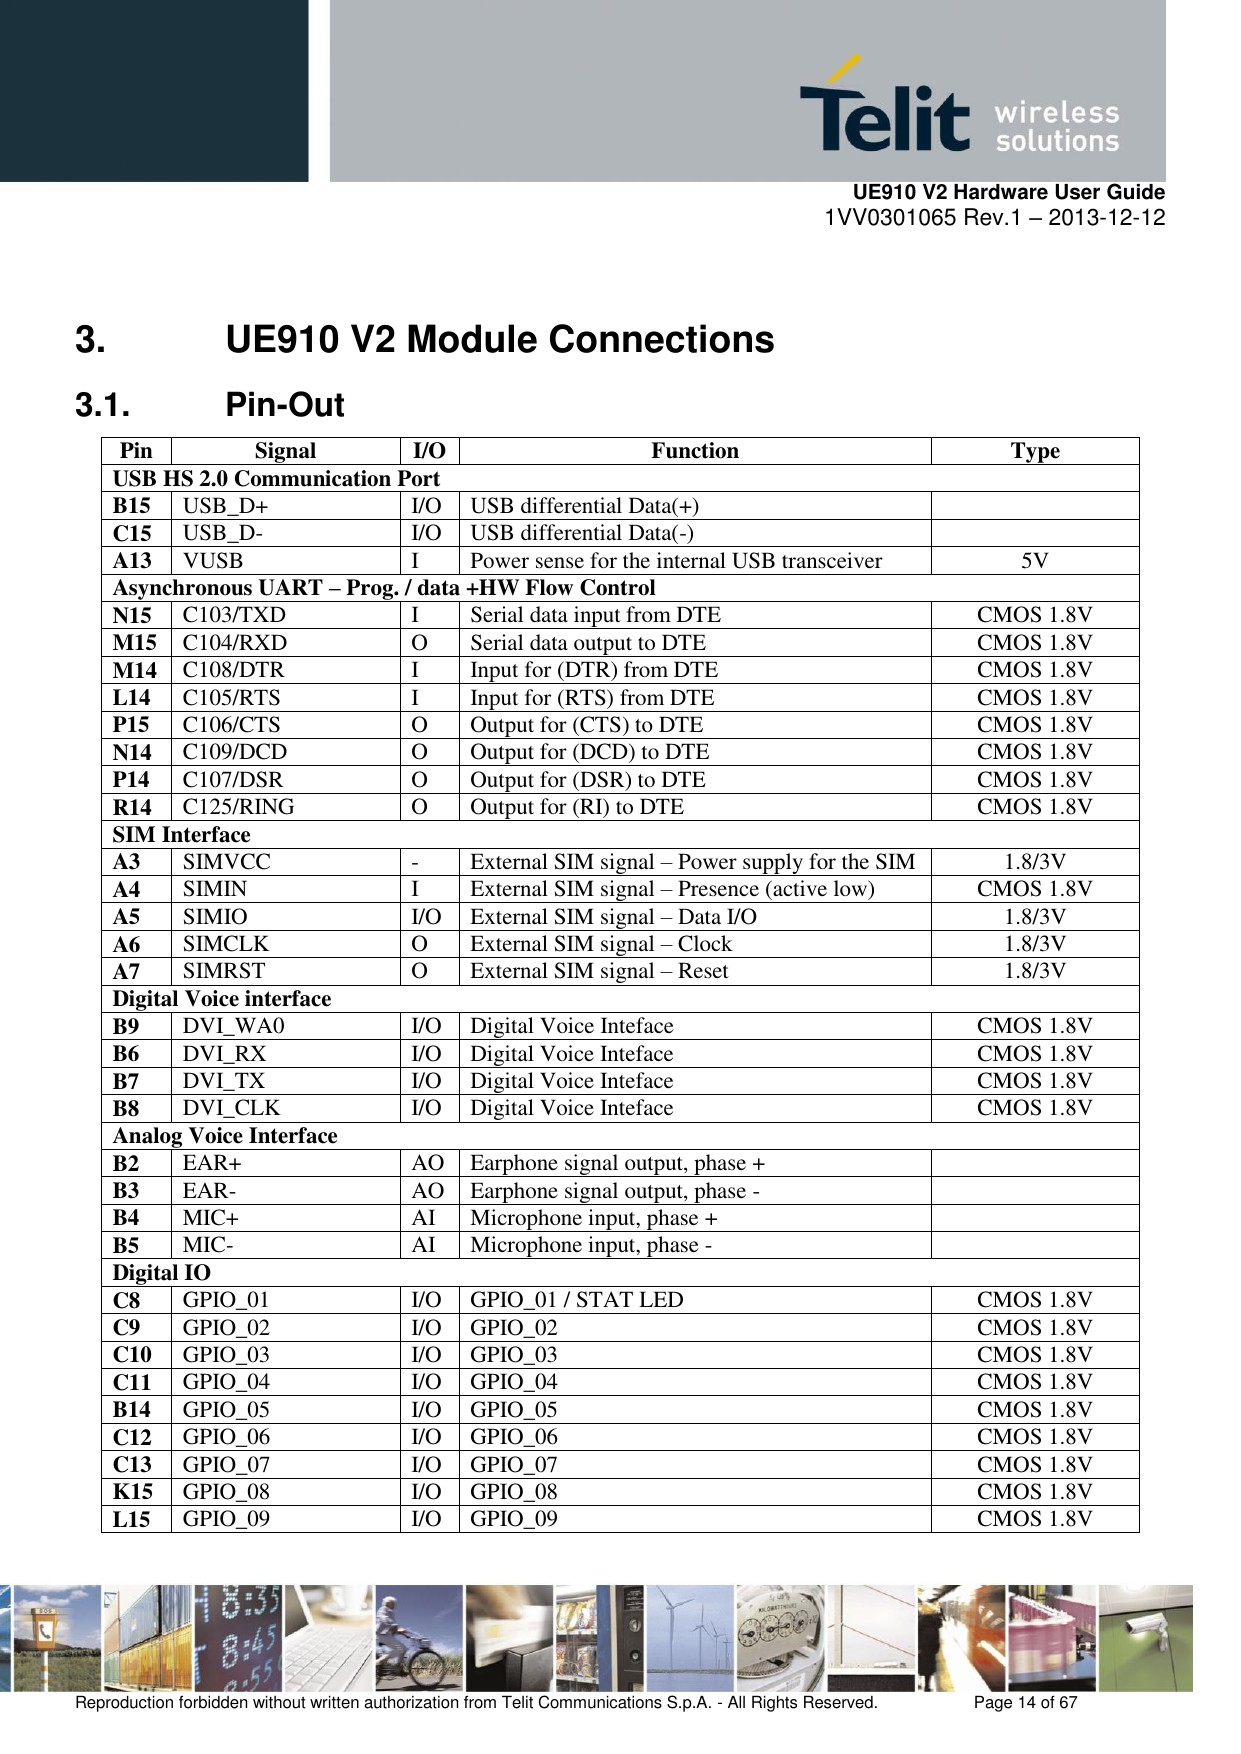     UE910 V2 Hardware User Guide 1VV0301065 Rev.1 – 2013-12-12  Reproduction forbidden without written authorization from Telit Communications S.p.A. - All Rights Reserved.    Page 14 of 67                                                     3.  UE910 V2 Module Connections 3.1.  Pin-Out Pin Signal I/O Function Type USB HS 2.0 Communication Port B15 USB_D+ I/O USB differential Data(+)  C15 USB_D- I/O USB differential Data(-)  A13 VUSB I Power sense for the internal USB transceiver 5V Asynchronous UART – Prog. / data +HW Flow Control N15 C103/TXD I Serial data input from DTE CMOS 1.8V M15 C104/RXD O Serial data output to DTE CMOS 1.8V M14 C108/DTR I Input for (DTR) from DTE CMOS 1.8V L14 C105/RTS I Input for (RTS) from DTE CMOS 1.8V P15 C106/CTS O Output for (CTS) to DTE CMOS 1.8V N14 C109/DCD O Output for (DCD) to DTE CMOS 1.8V P14 C107/DSR O Output for (DSR) to DTE CMOS 1.8V R14 C125/RING O Output for (RI) to DTE CMOS 1.8V SIM Interface A3 SIMVCC - External SIM signal – Power supply for the SIM 1.8/3V A4 SIMIN I External SIM signal – Presence (active low) CMOS 1.8V A5 SIMIO I/O External SIM signal – Data I/O 1.8/3V A6 SIMCLK O External SIM signal – Clock 1.8/3V A7 SIMRST O External SIM signal – Reset 1.8/3V Digital Voice interface  B9 DVI_WA0 I/O Digital Voice Inteface CMOS 1.8V B6 DVI_RX I/O Digital Voice Inteface CMOS 1.8V B7 DVI_TX I/O Digital Voice Inteface CMOS 1.8V B8 DVI_CLK I/O Digital Voice Inteface CMOS 1.8V Analog Voice Interface  B2 EAR+ AO Earphone signal output, phase +  B3 EAR- AO Earphone signal output, phase -  B4 MIC+ AI Microphone input, phase +  B5 MIC- AI Microphone input, phase -  Digital IO C8 GPIO_01 I/O GPIO_01 / STAT LED CMOS 1.8V C9 GPIO_02 I/O GPIO_02 CMOS 1.8V C10 GPIO_03 I/O GPIO_03 CMOS 1.8V C11 GPIO_04 I/O GPIO_04 CMOS 1.8V B14 GPIO_05 I/O GPIO_05 CMOS 1.8V C12 GPIO_06 I/O GPIO_06 CMOS 1.8V C13 GPIO_07 I/O GPIO_07 CMOS 1.8V K15 GPIO_08 I/O GPIO_08 CMOS 1.8V L15 GPIO_09 I/O GPIO_09 CMOS 1.8V 